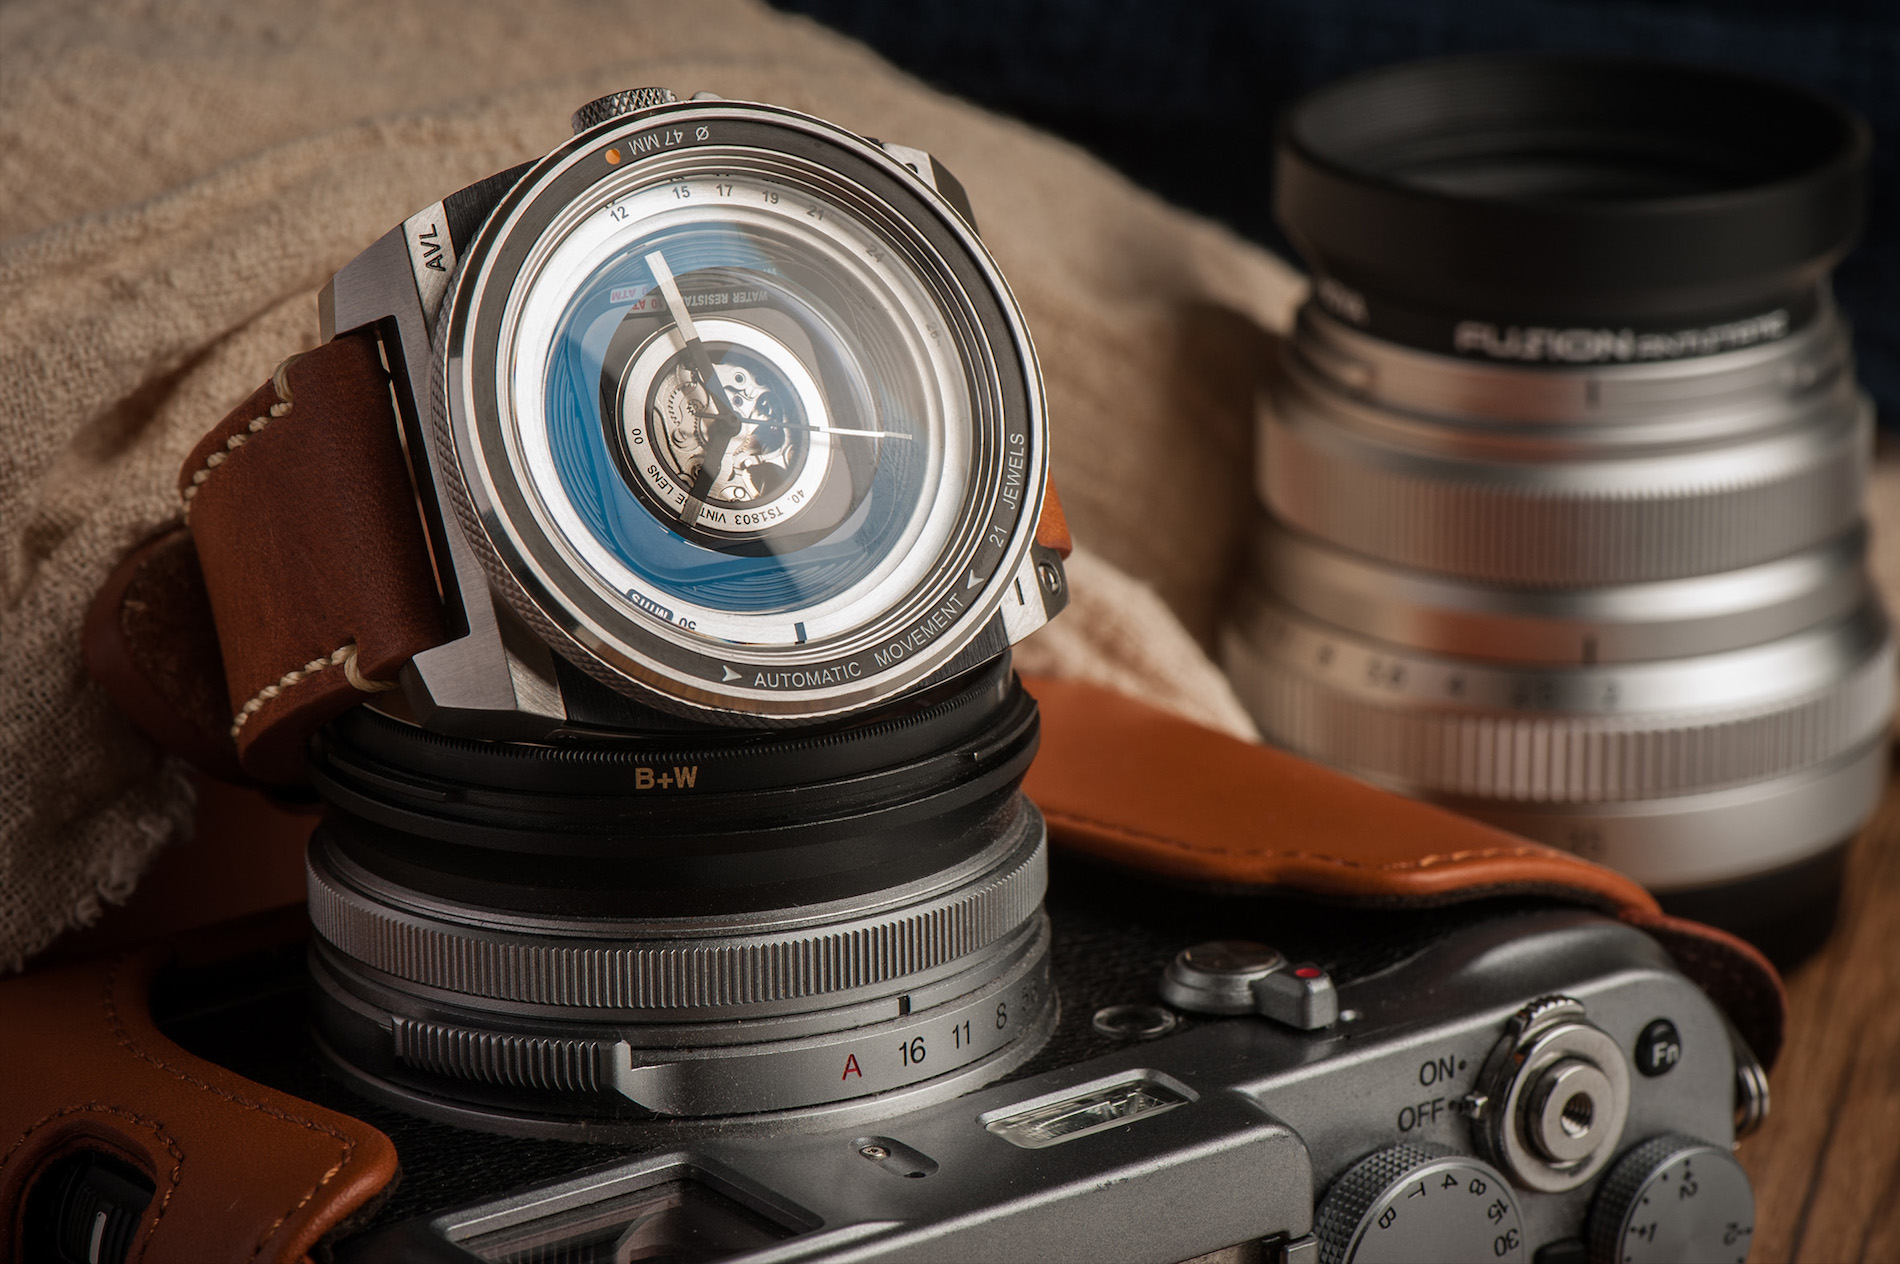 TACS AVL2 Watch Inspired By Vintage Cameras